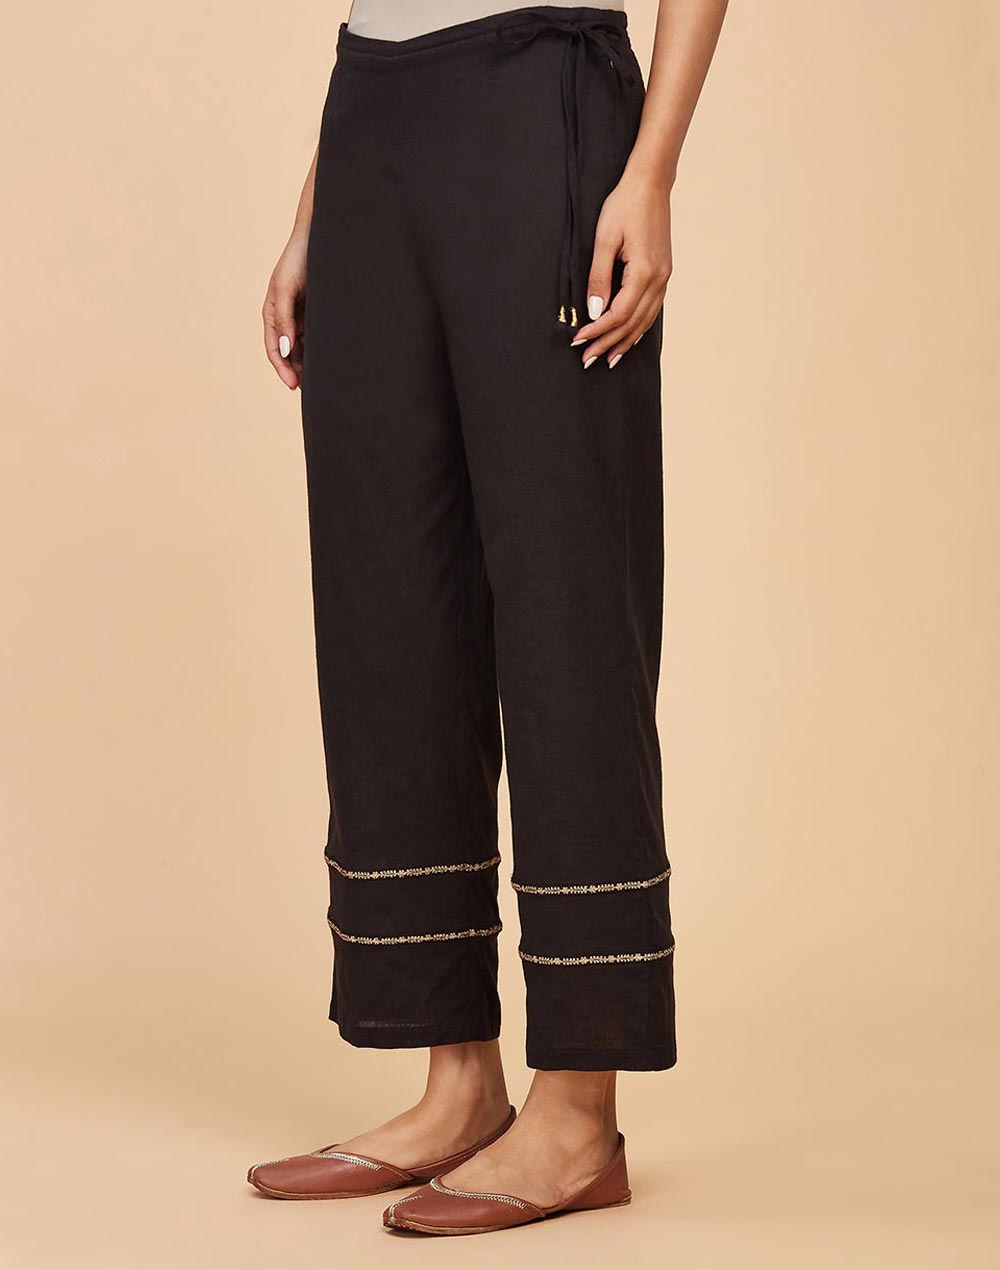 Buy Black Cotton Embroidered Ijar Pant for Women Online at